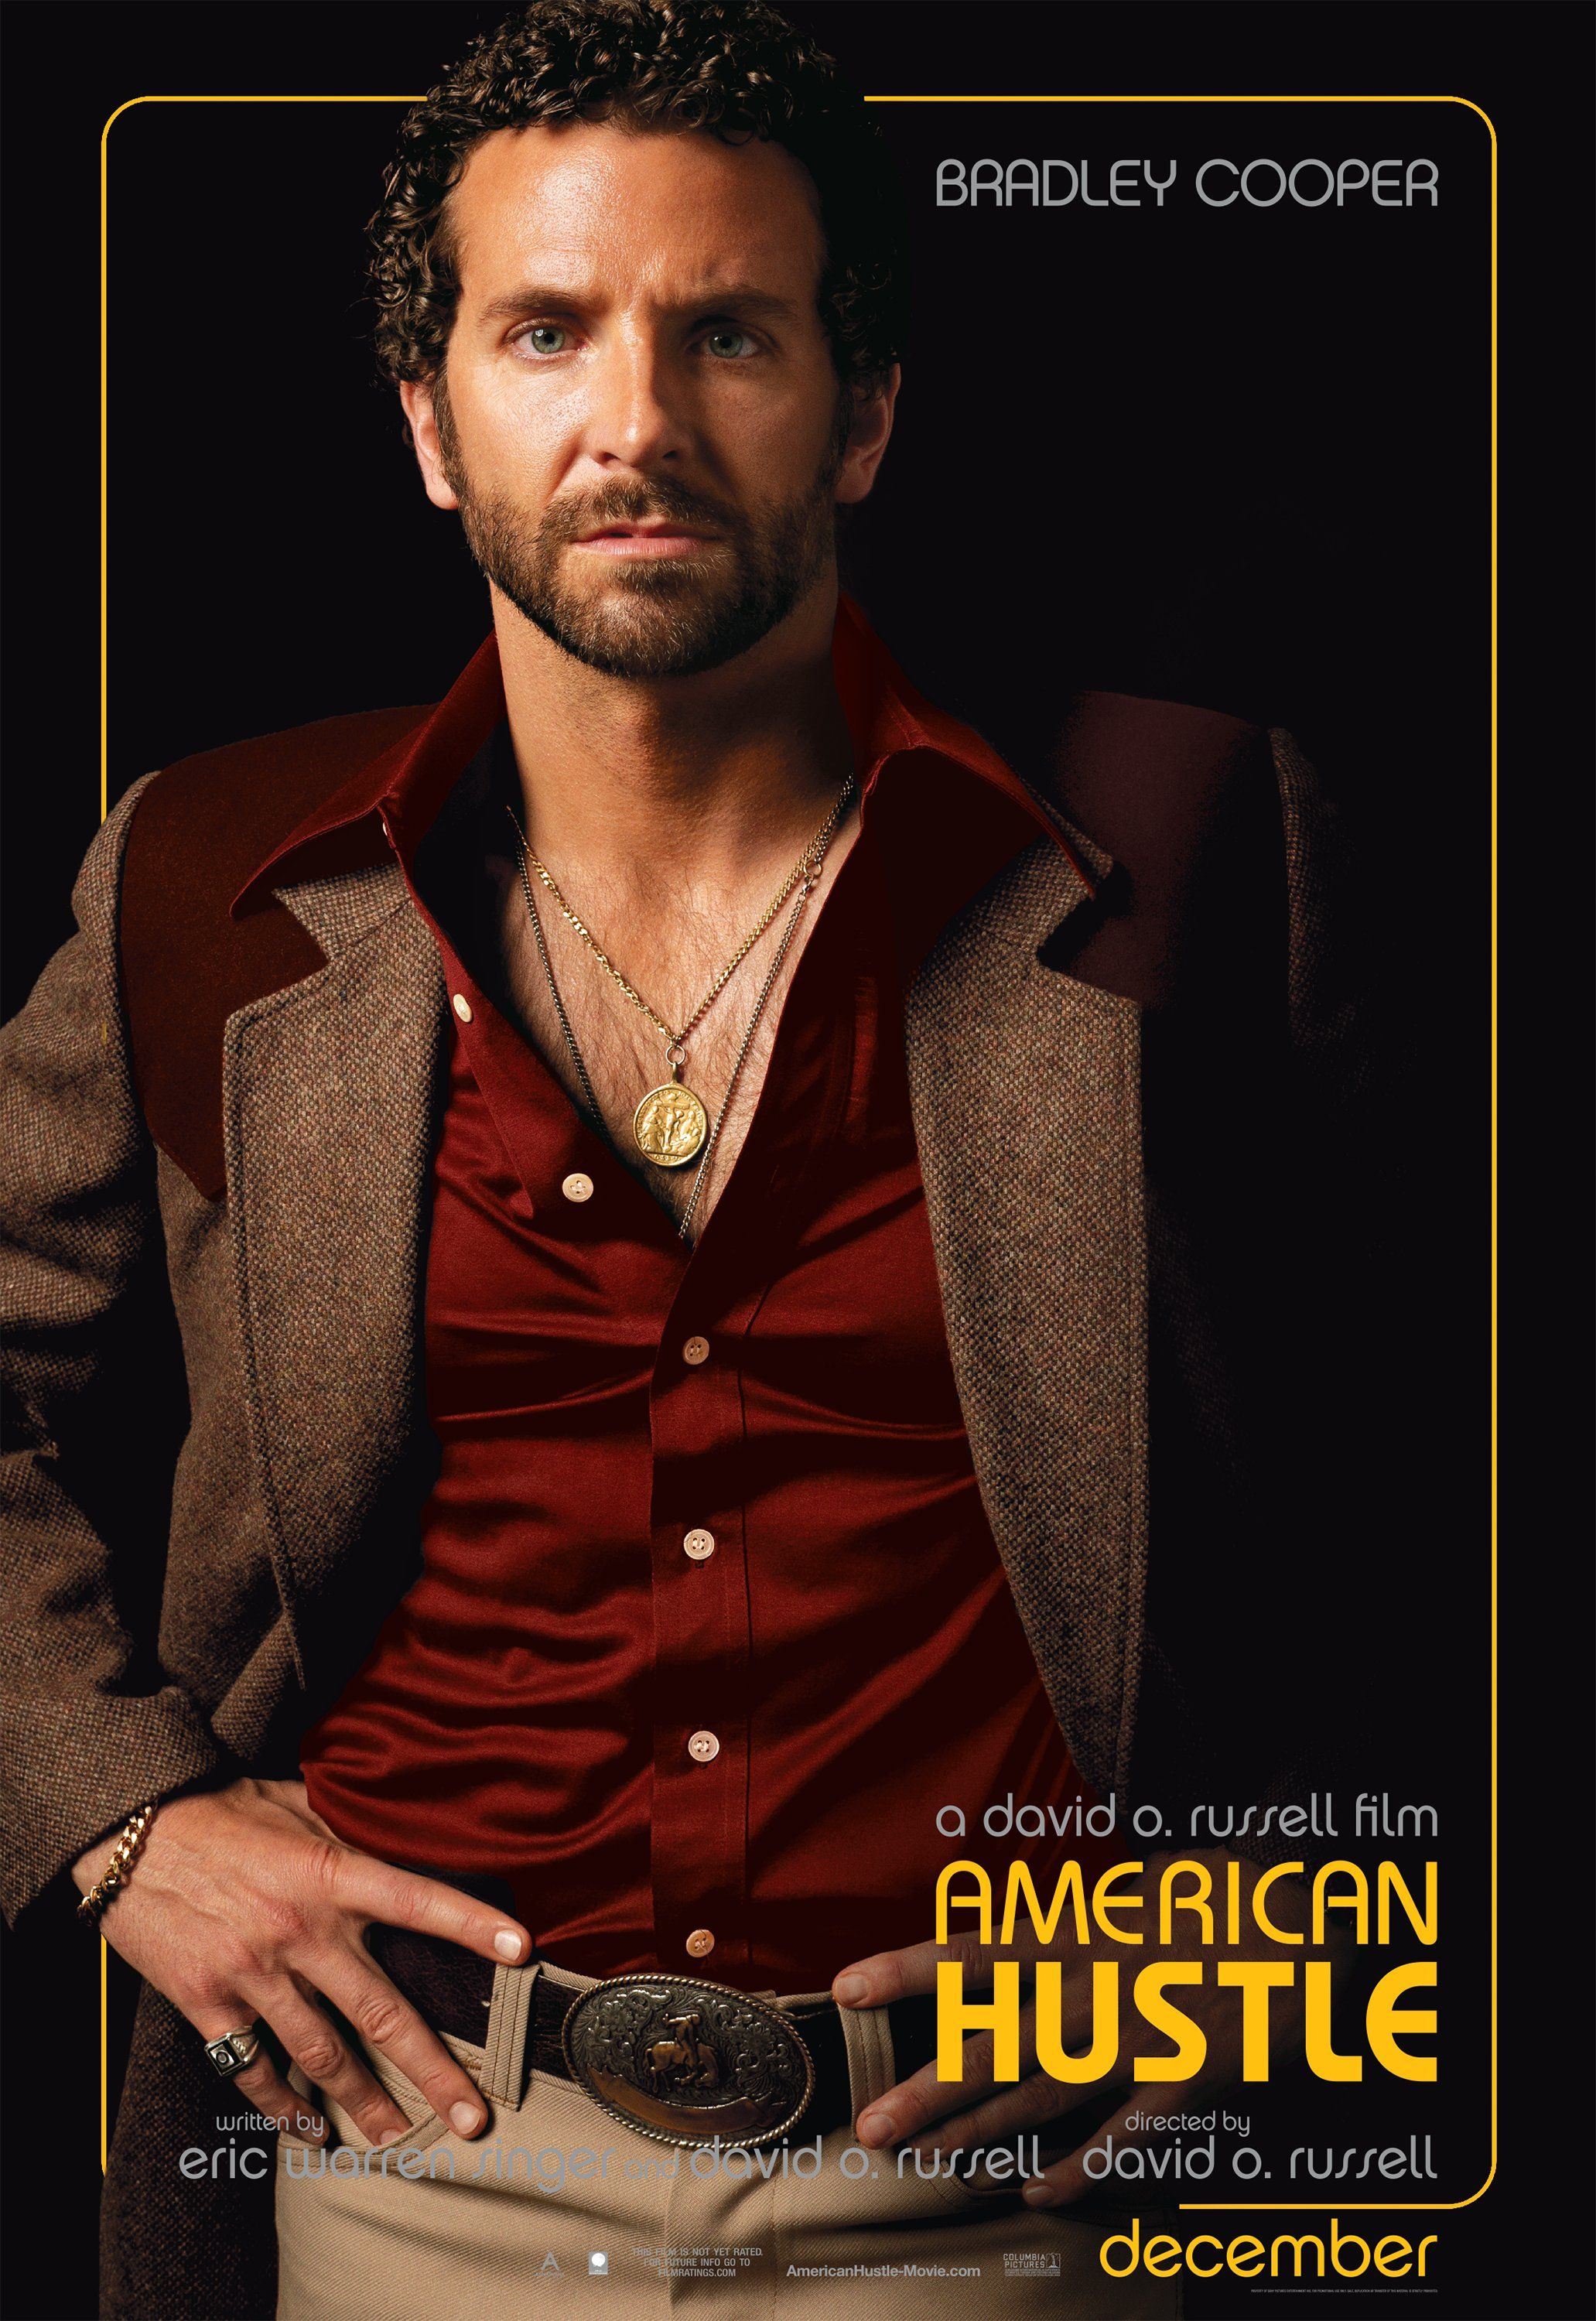 AMERICAN HUSTLE Character Posters with Christian Bale, Bradley Cooper, Jeremy Renner ...2063 x 3000